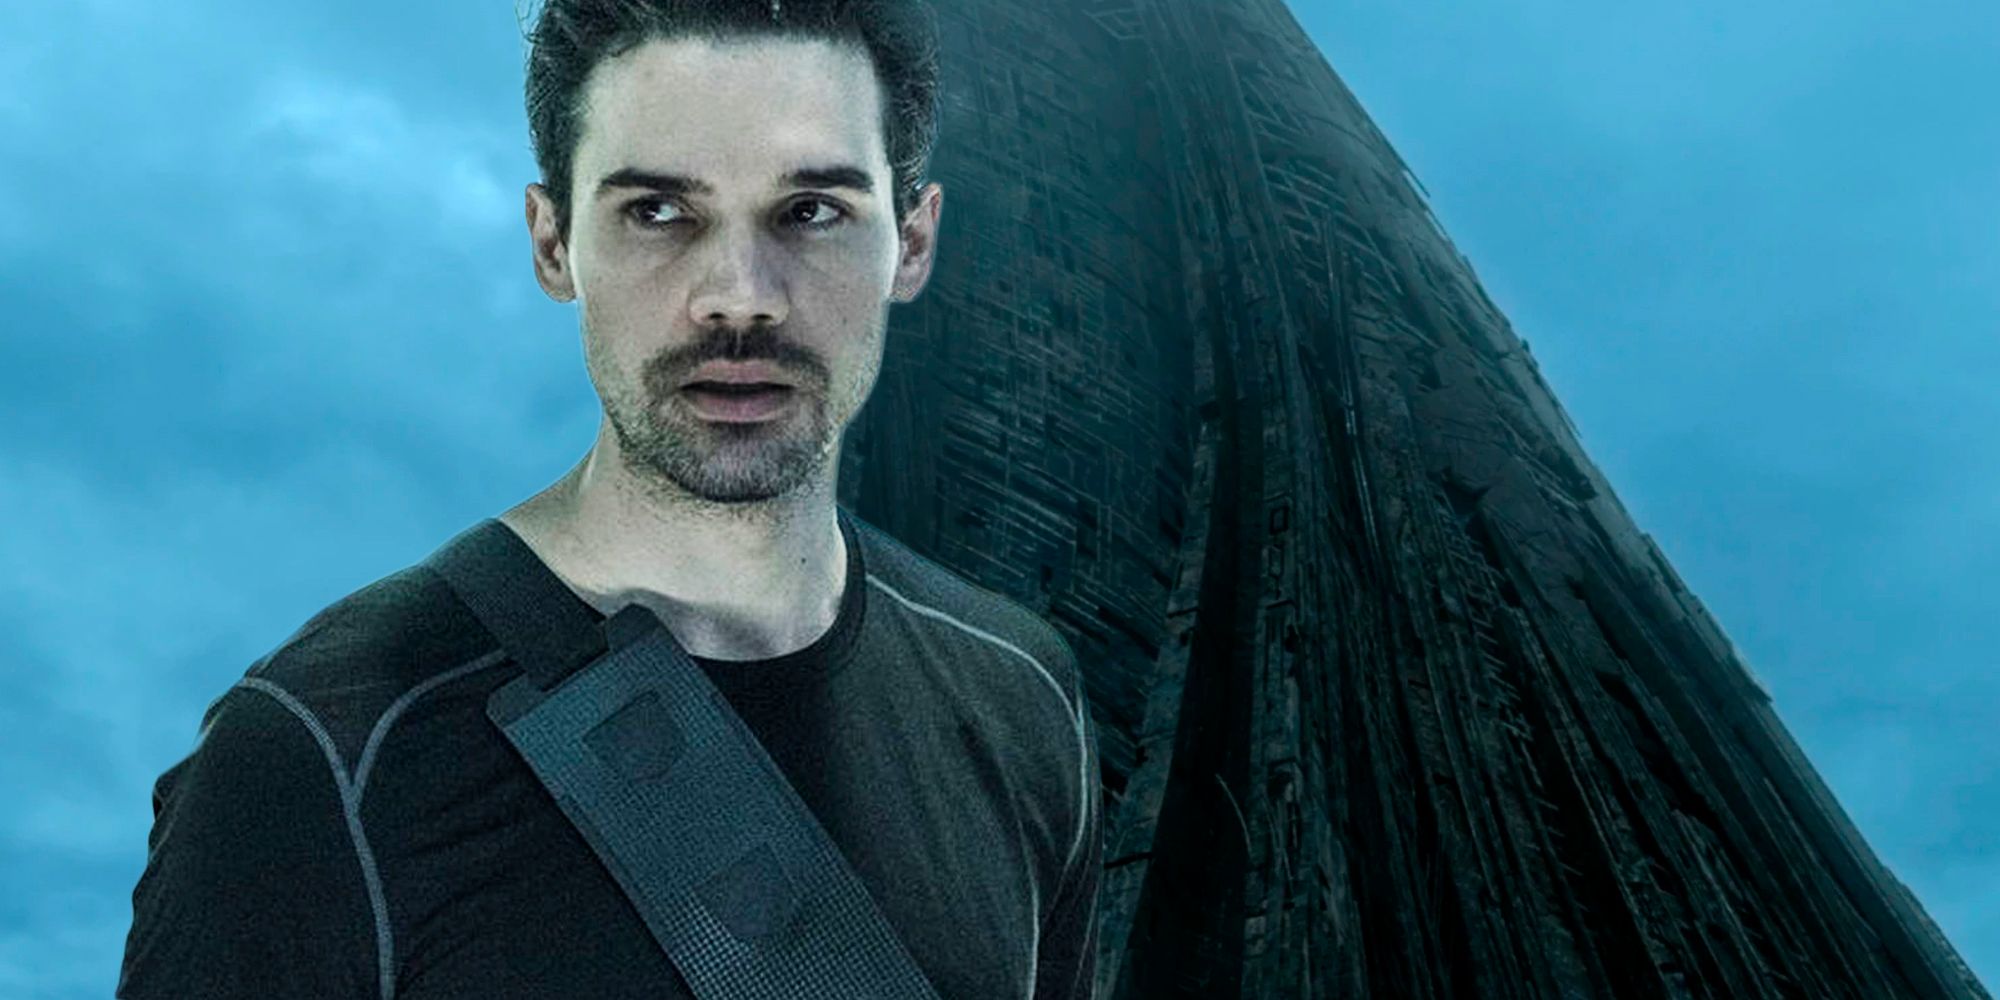 The Expanse Season 5 Why James Holden is Special Explained